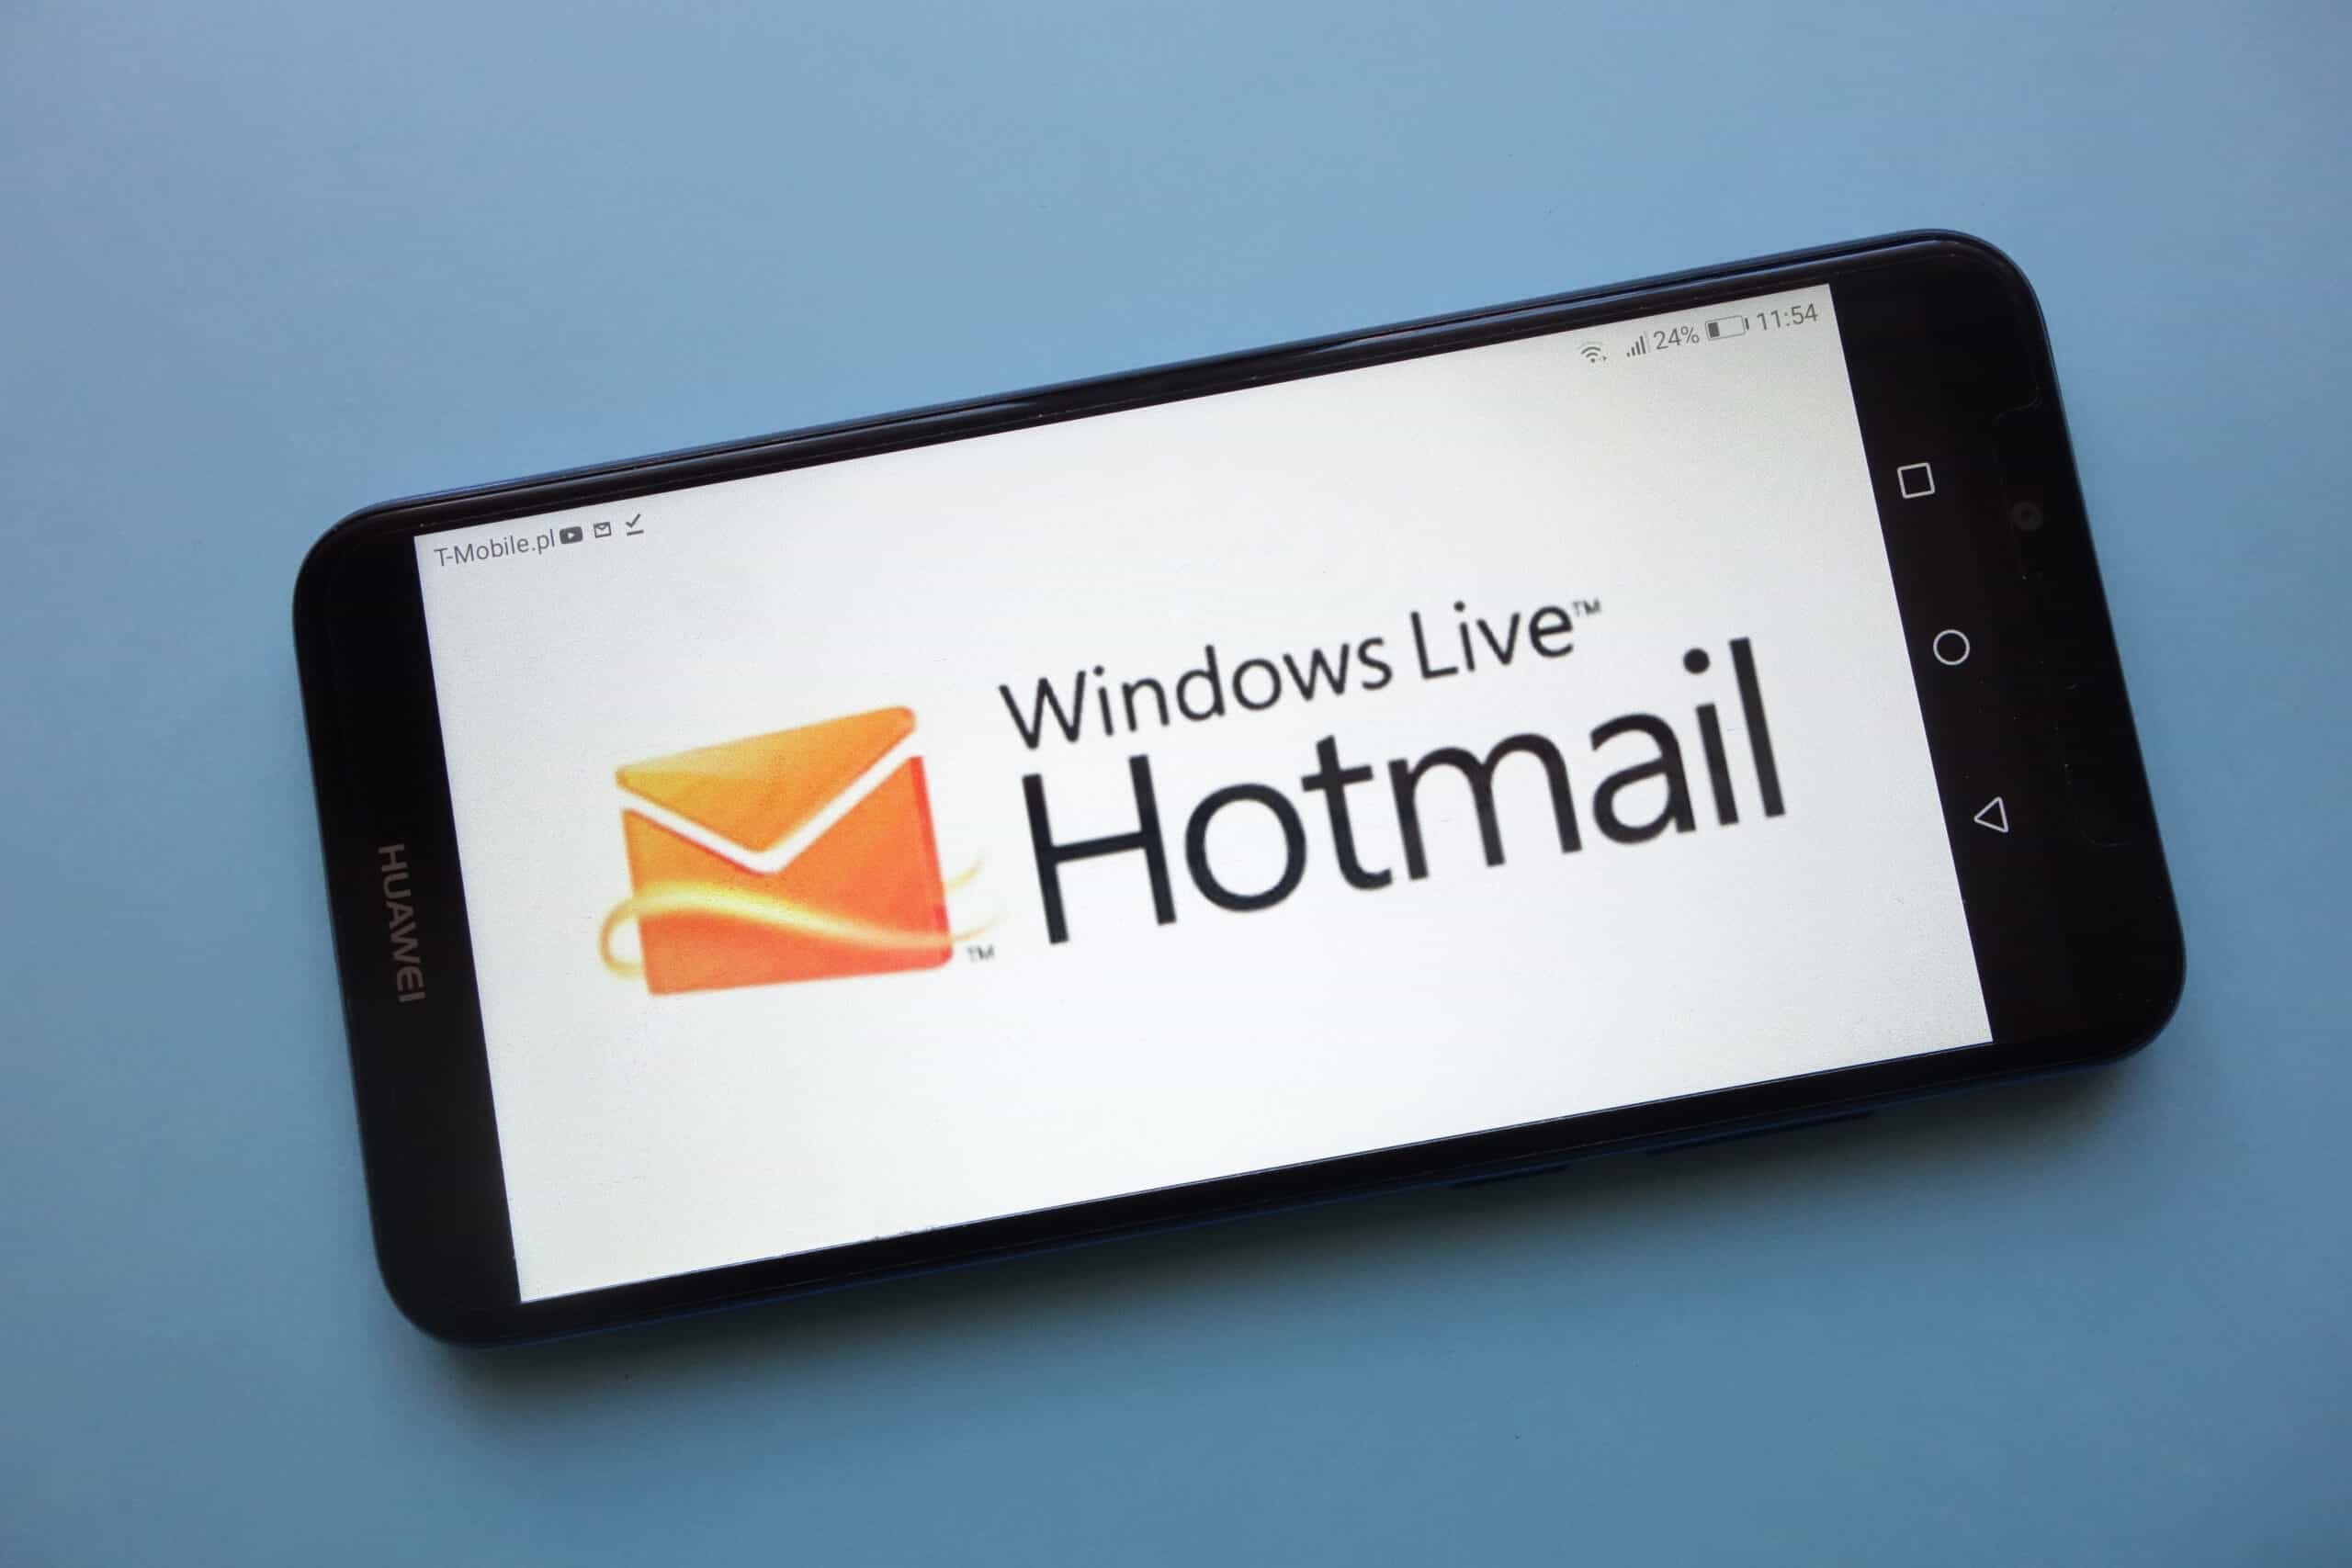 hotmail on a smartphone screen